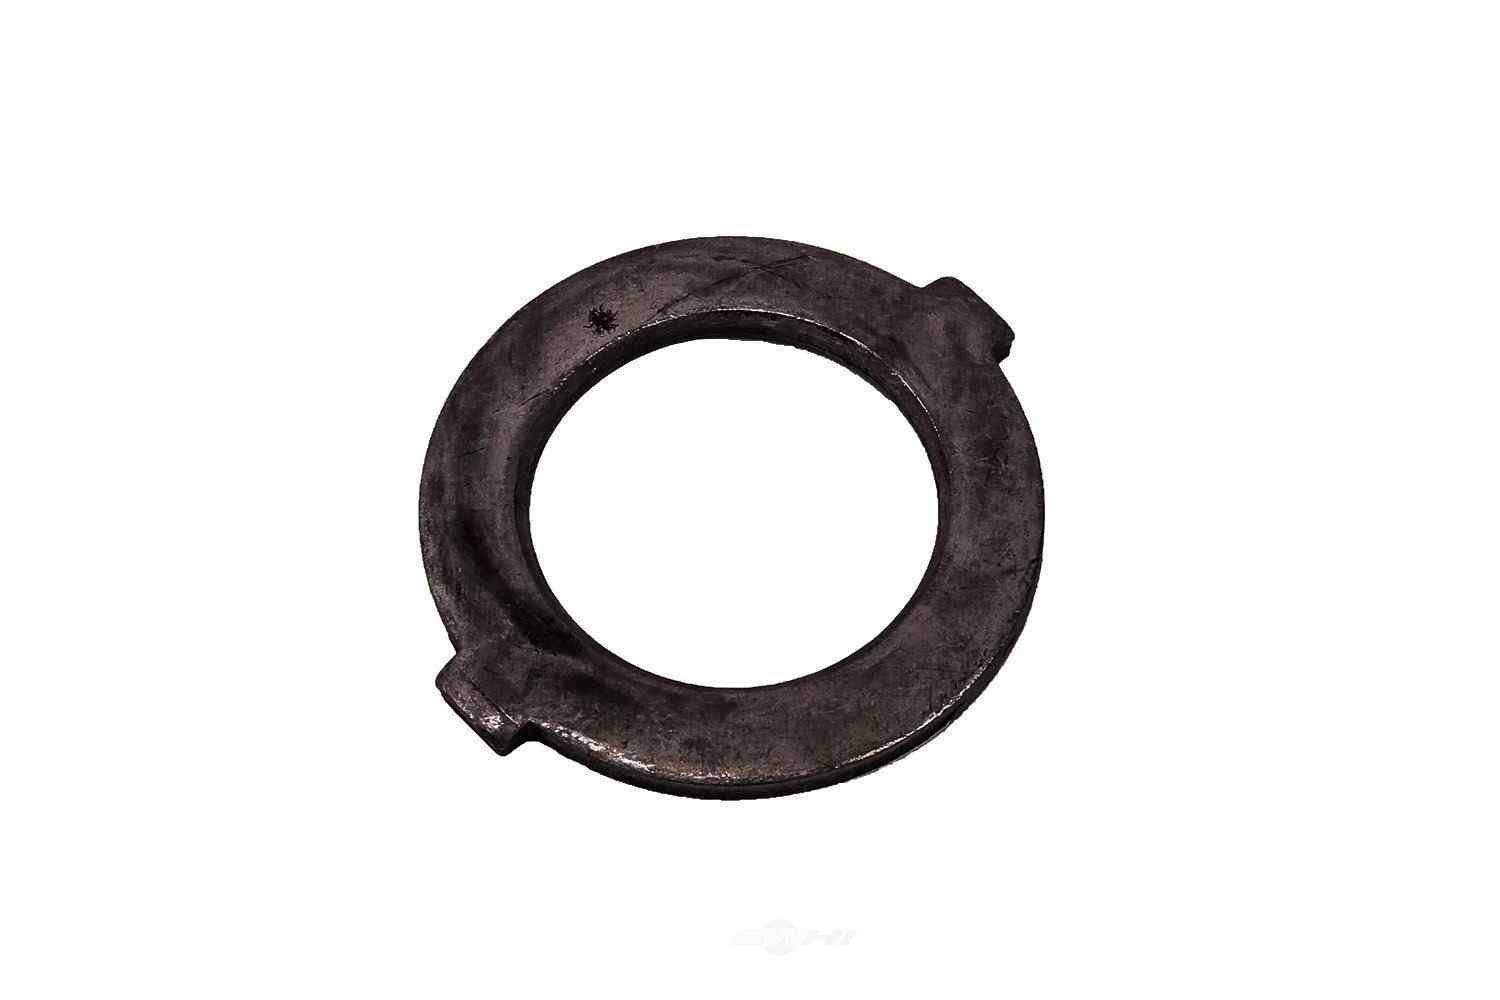 GM GENUINE PARTS - Axle Spindle Thrust Washer - GMP 25931932